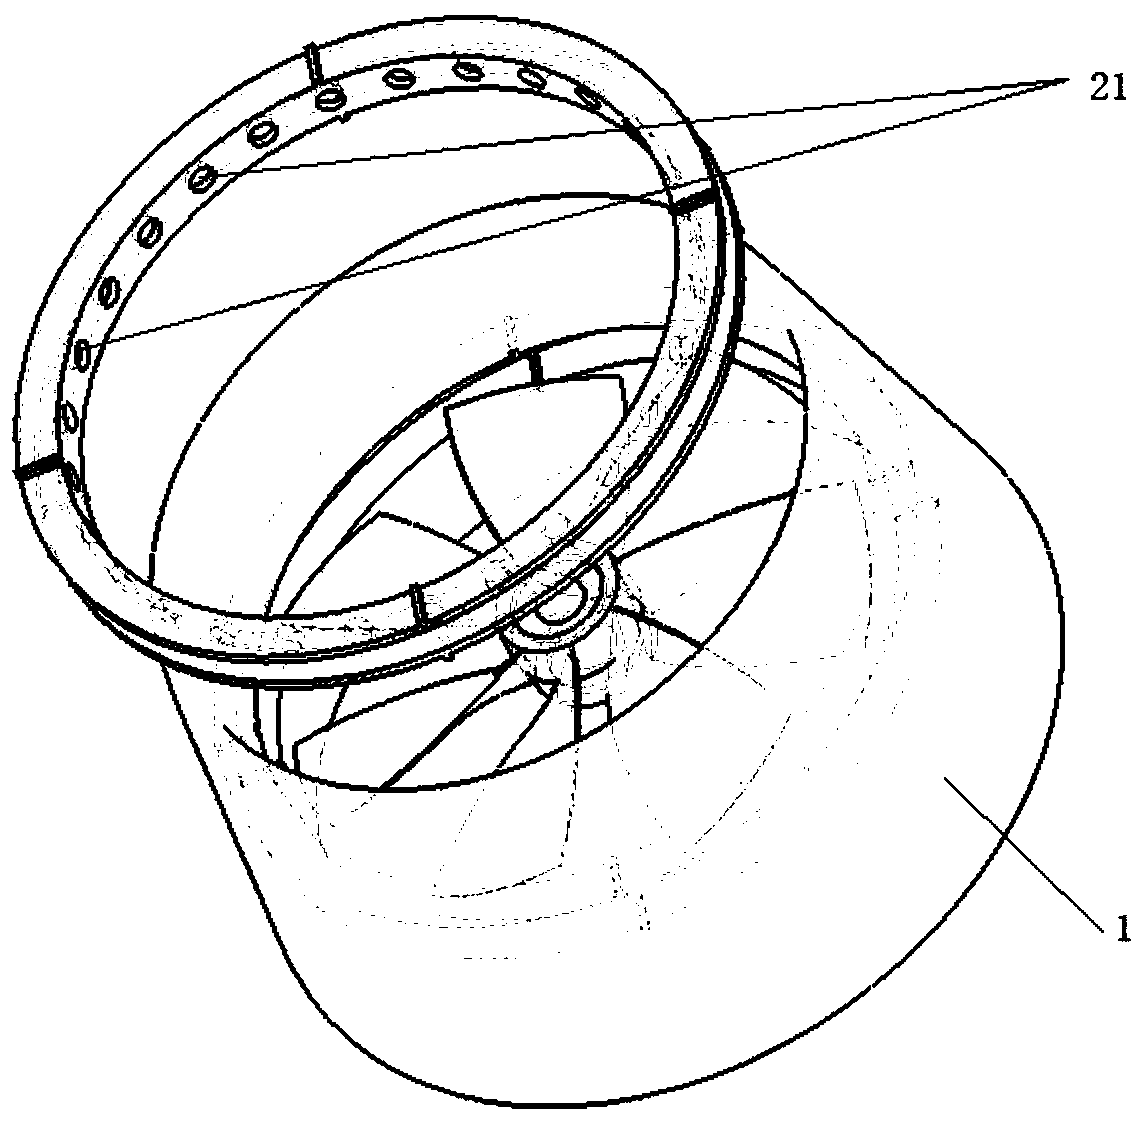 Open-hole deflector and pump-jet propeller based on open-hole deflector method